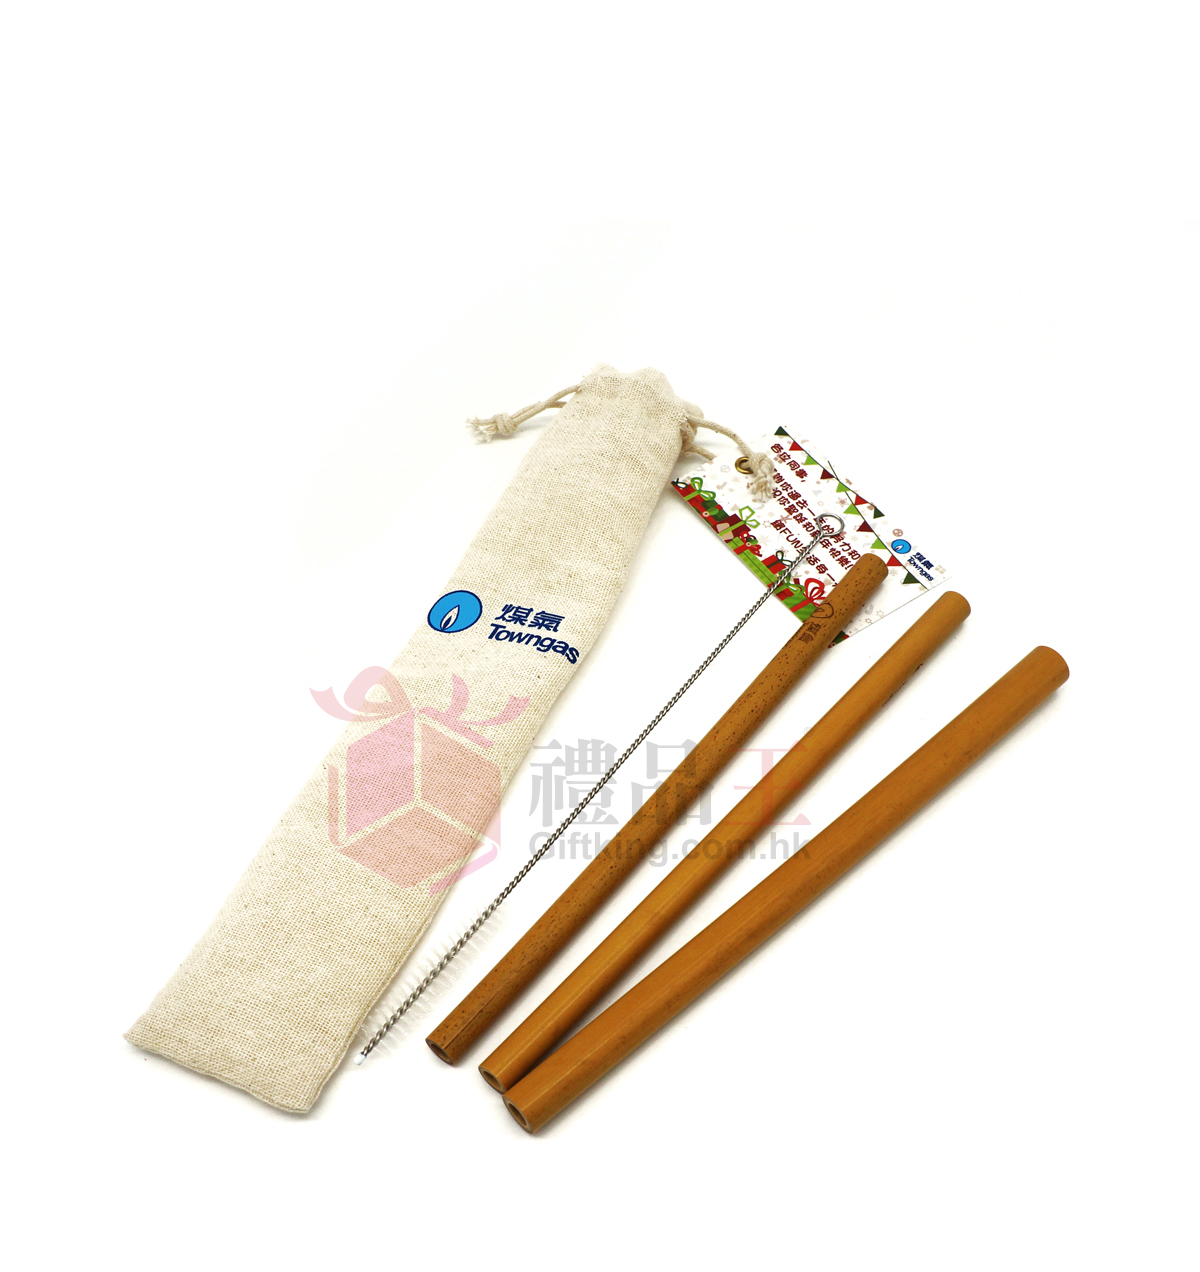 Towngas bamboo straw combination (Environmental gift)